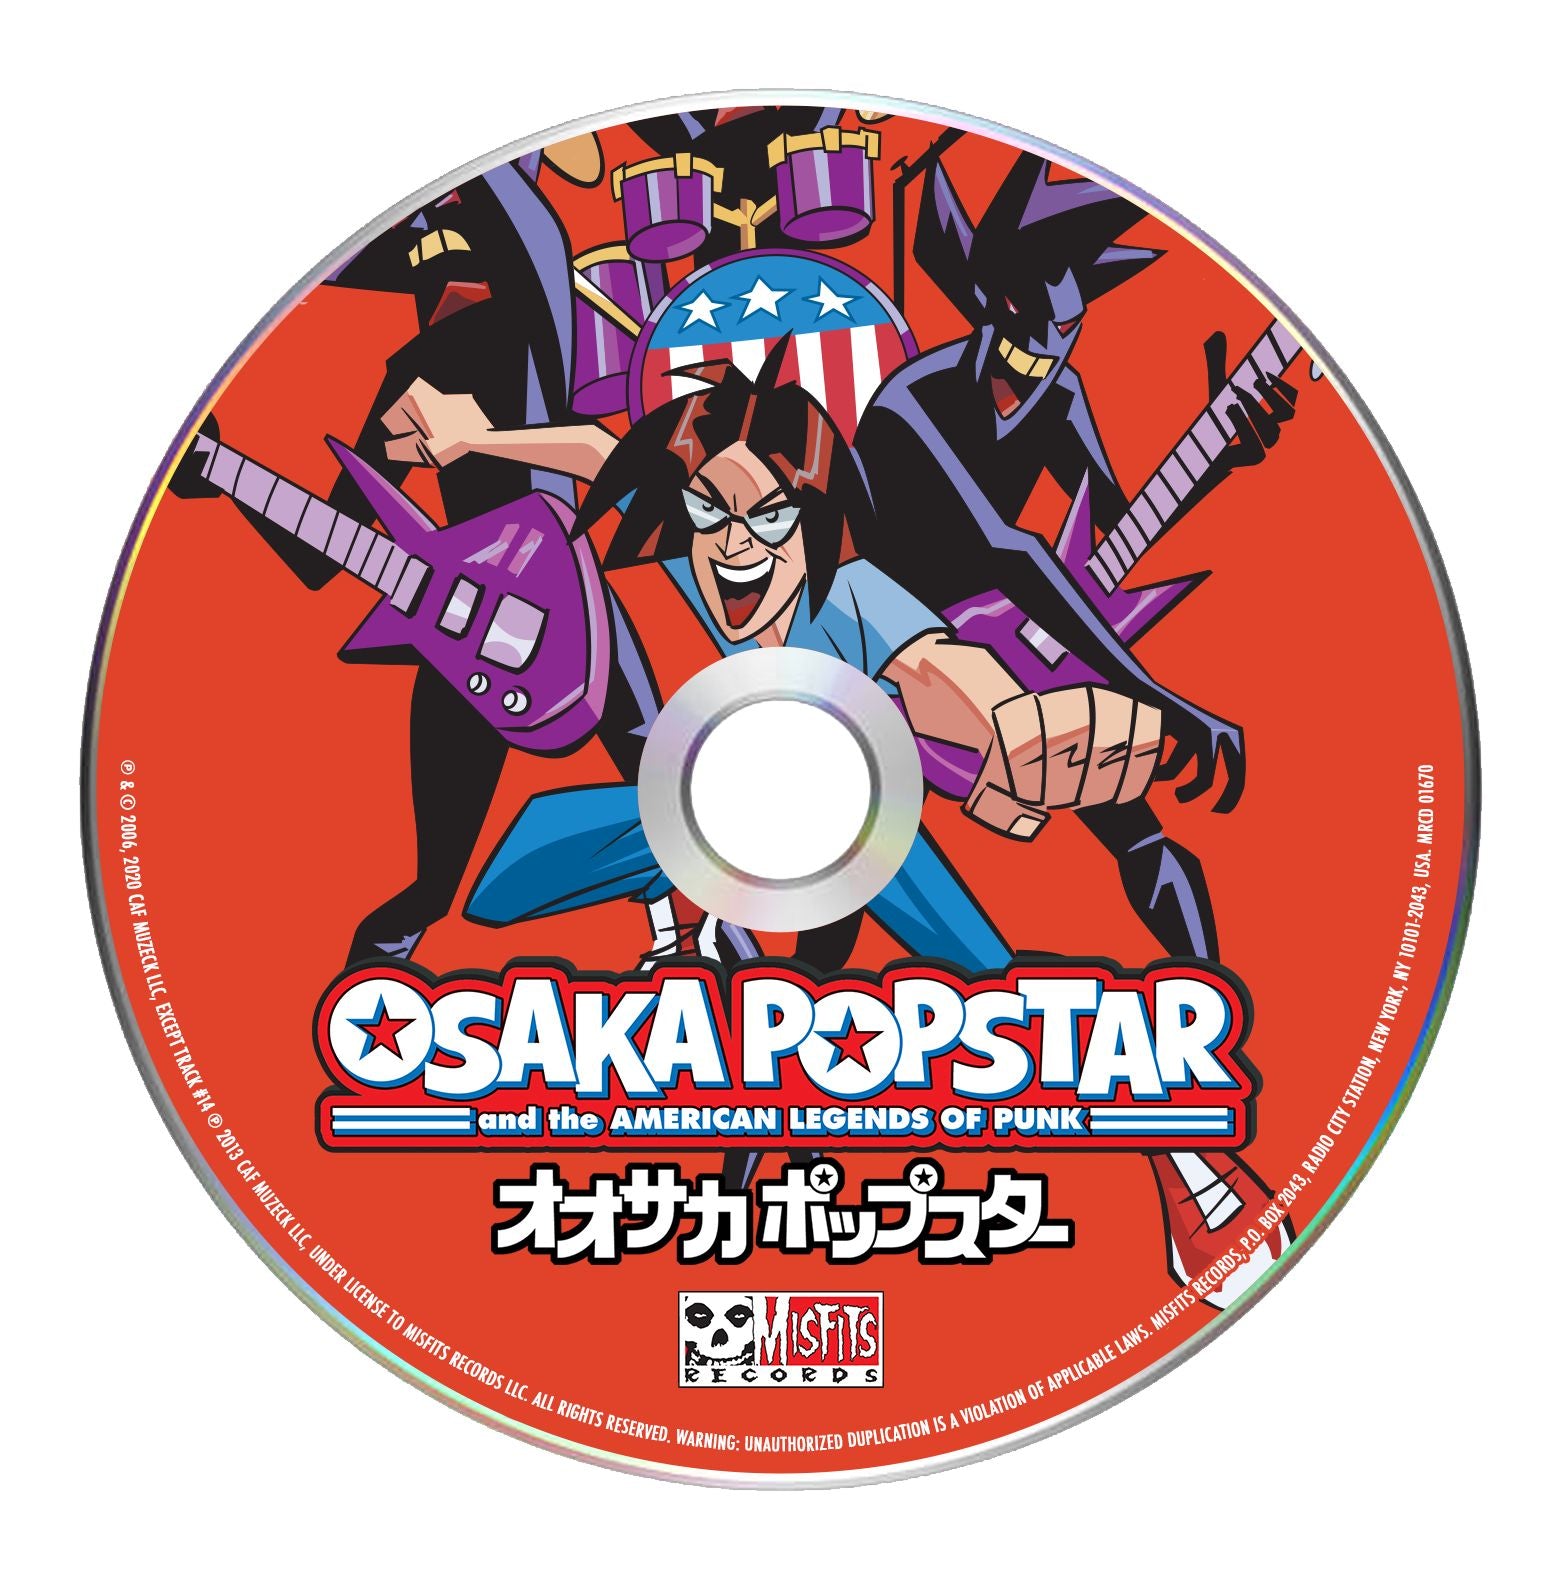 OSAKA POPSTAR & THE AMERICAN LEGENDS OF PUNK (EXPANDED EDITION